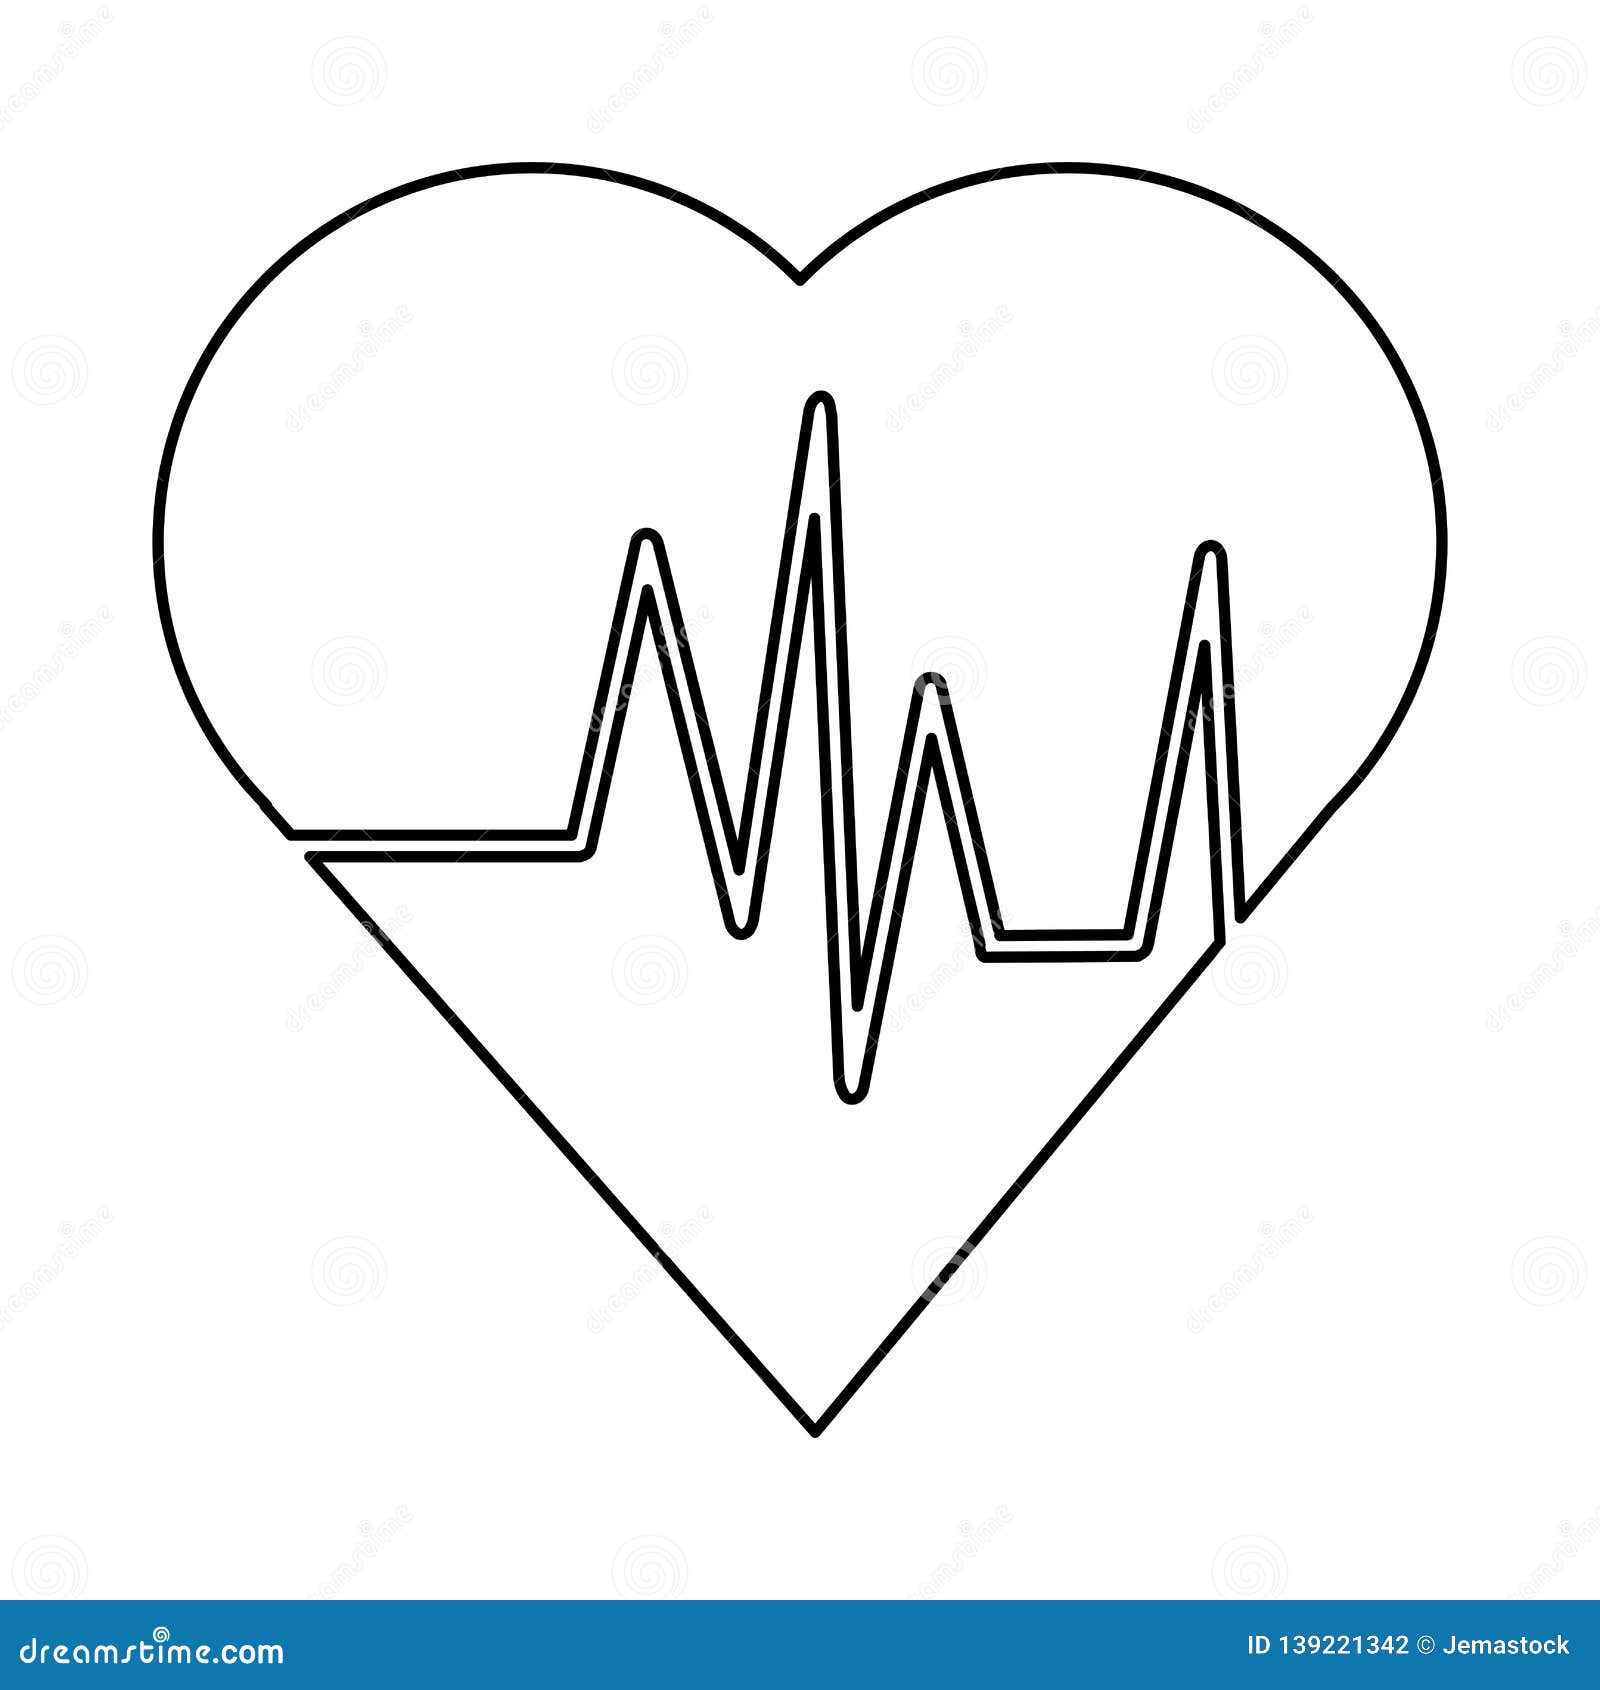 Heart Cardio Heartbeat Symbol in Black and White Stock Vector ...